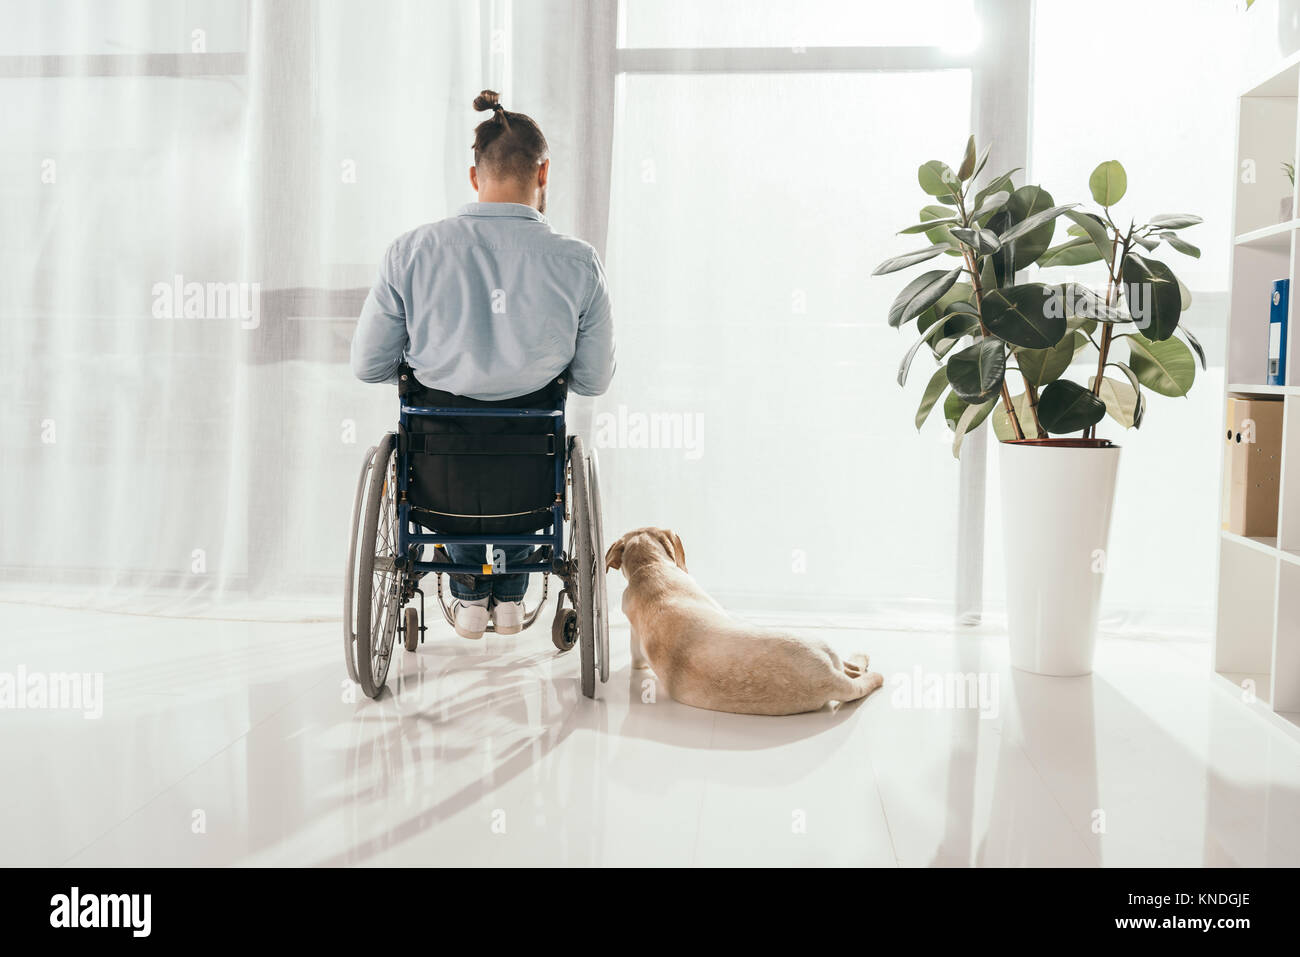 man on wheelchair and his dog Stock Photo